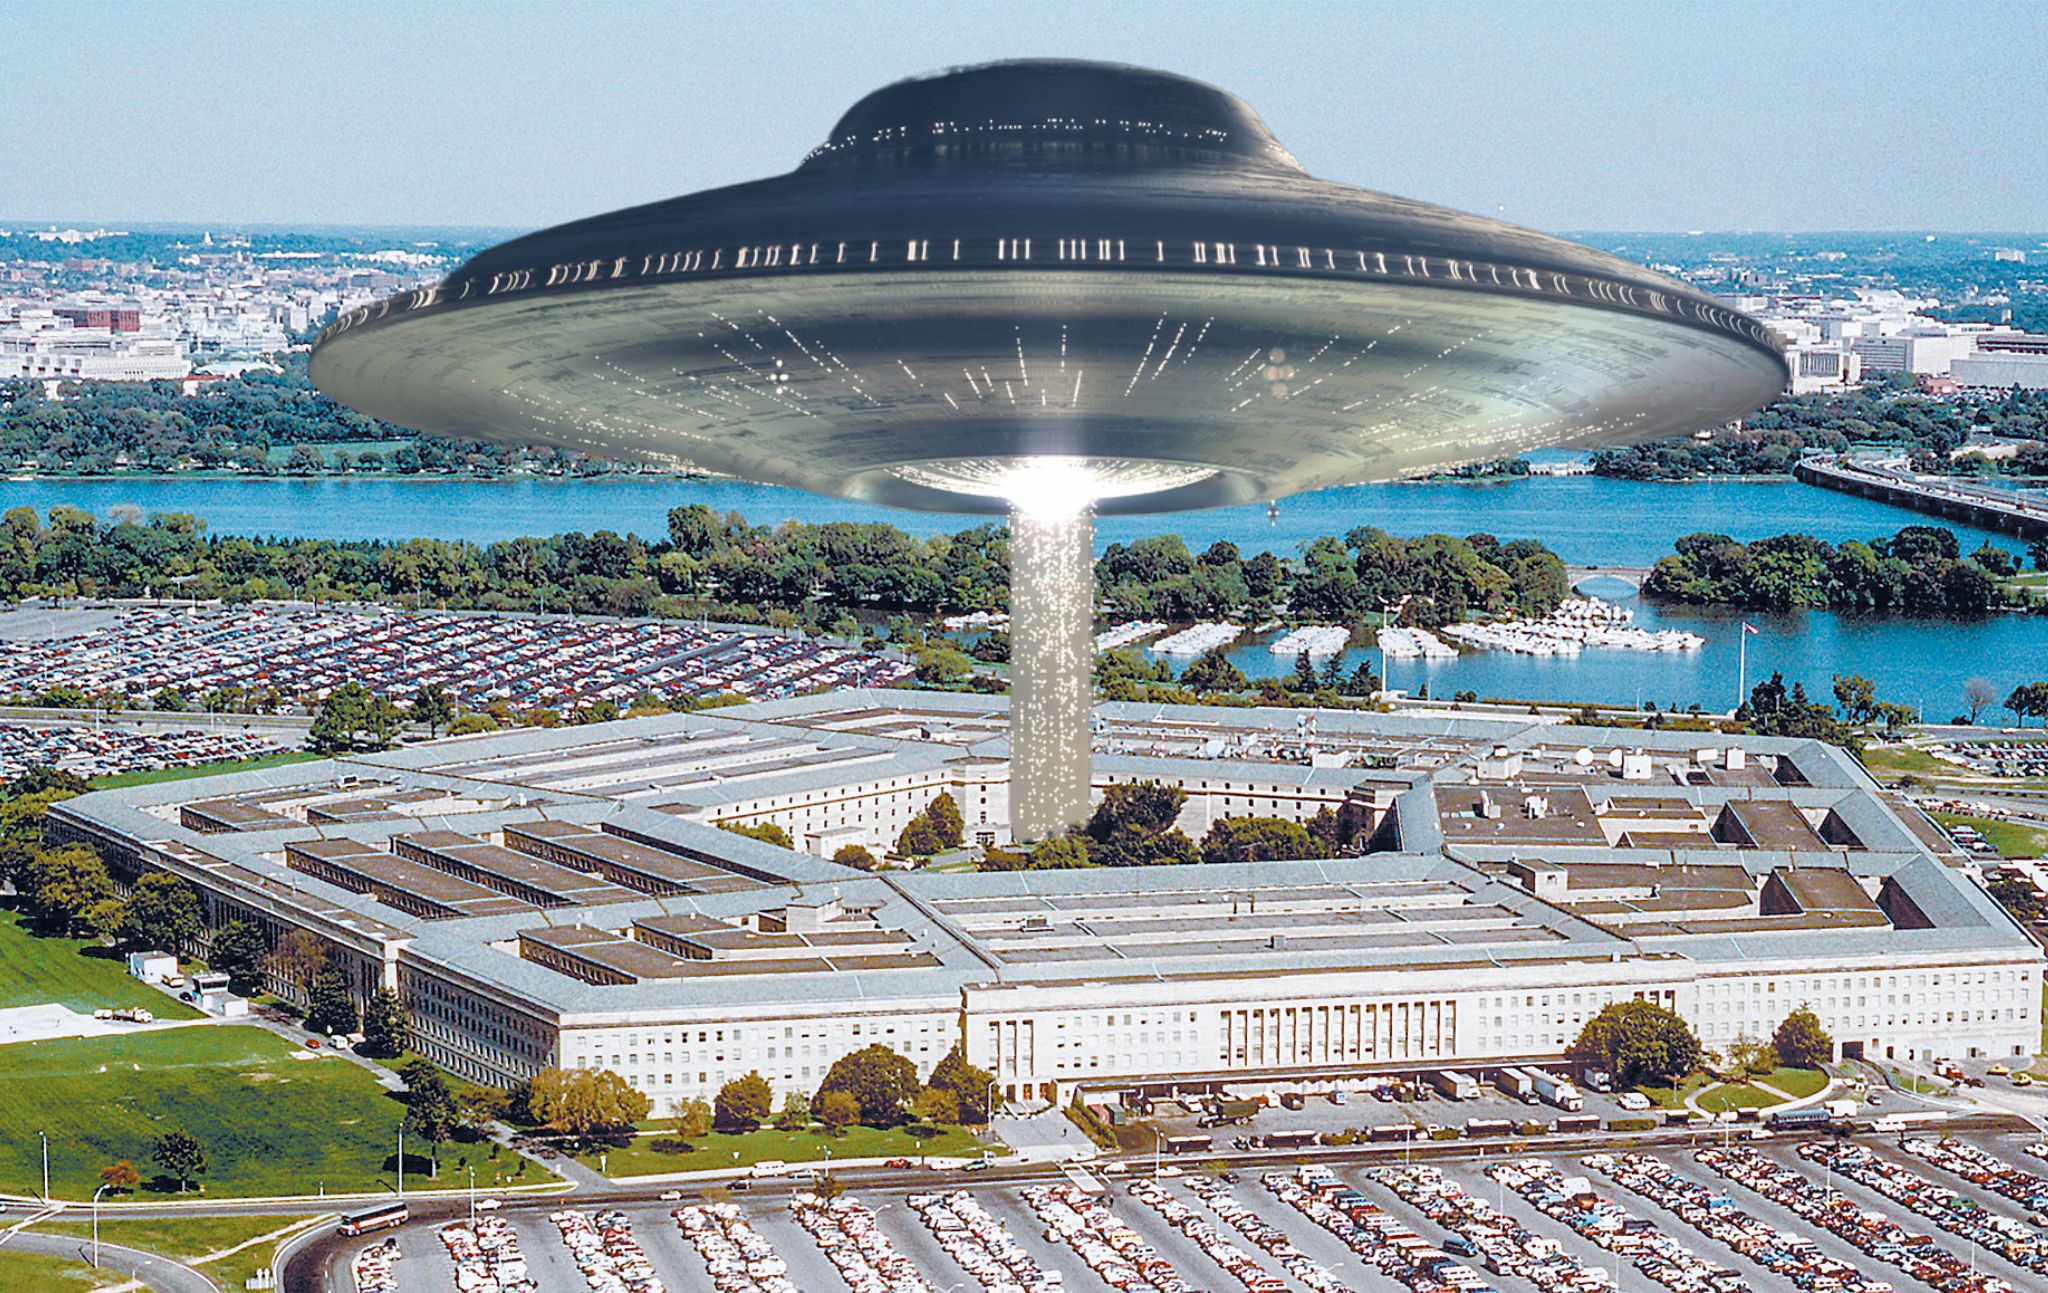 pentagon-ufo-chief-says-alien-mothership-in-our-solar-system-possible